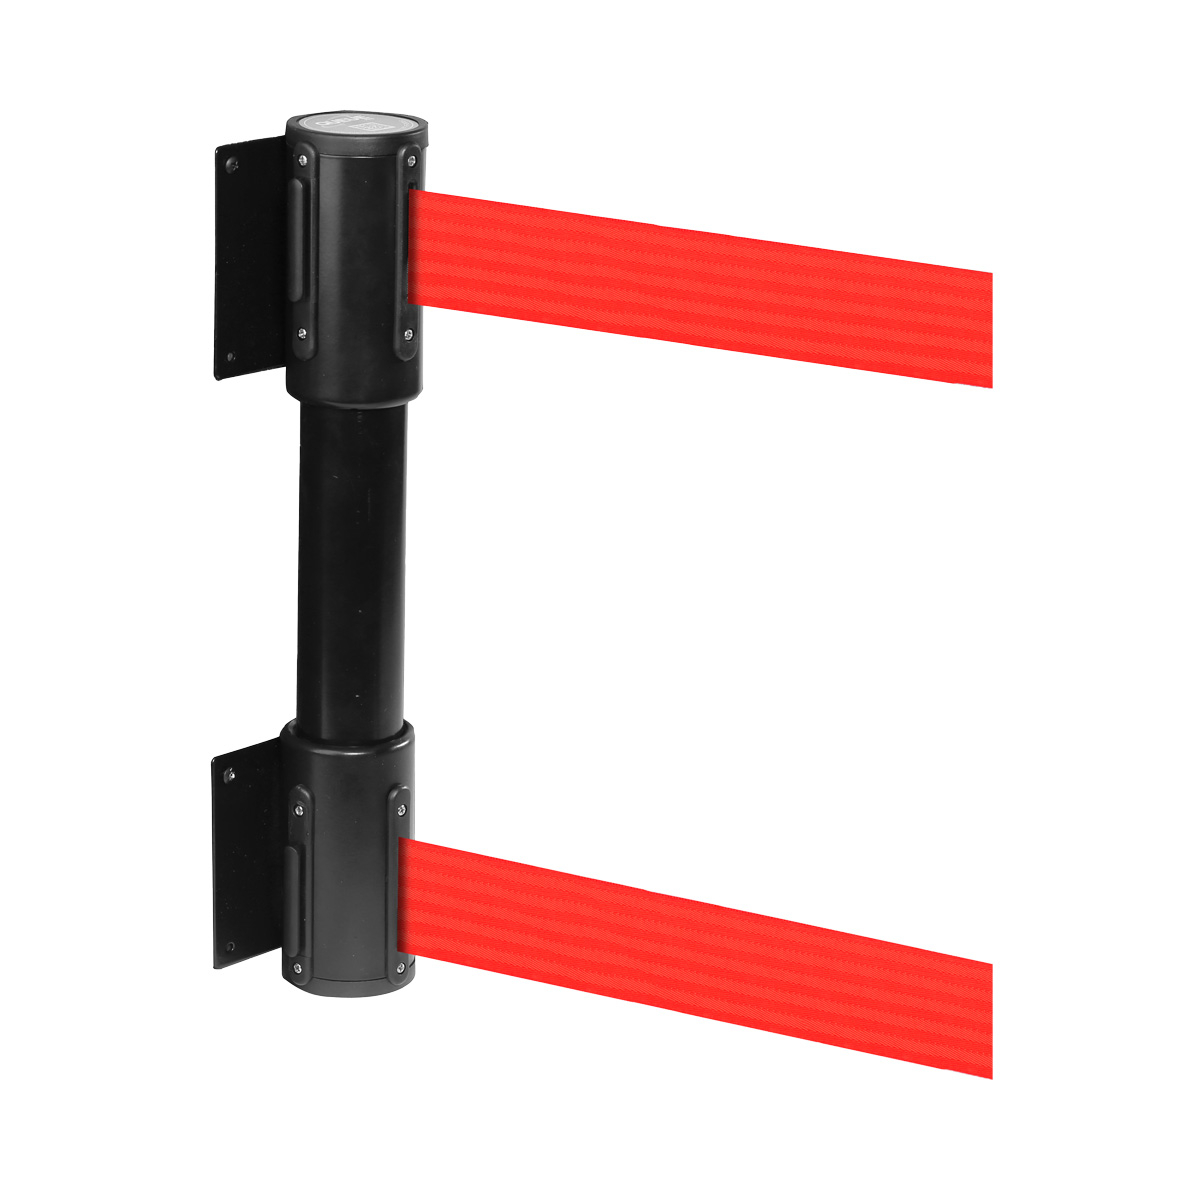 WallMaster Wall Mounted Belt Barriers Have Two Retracting Belts To Prevent People Ducking Under Barrier